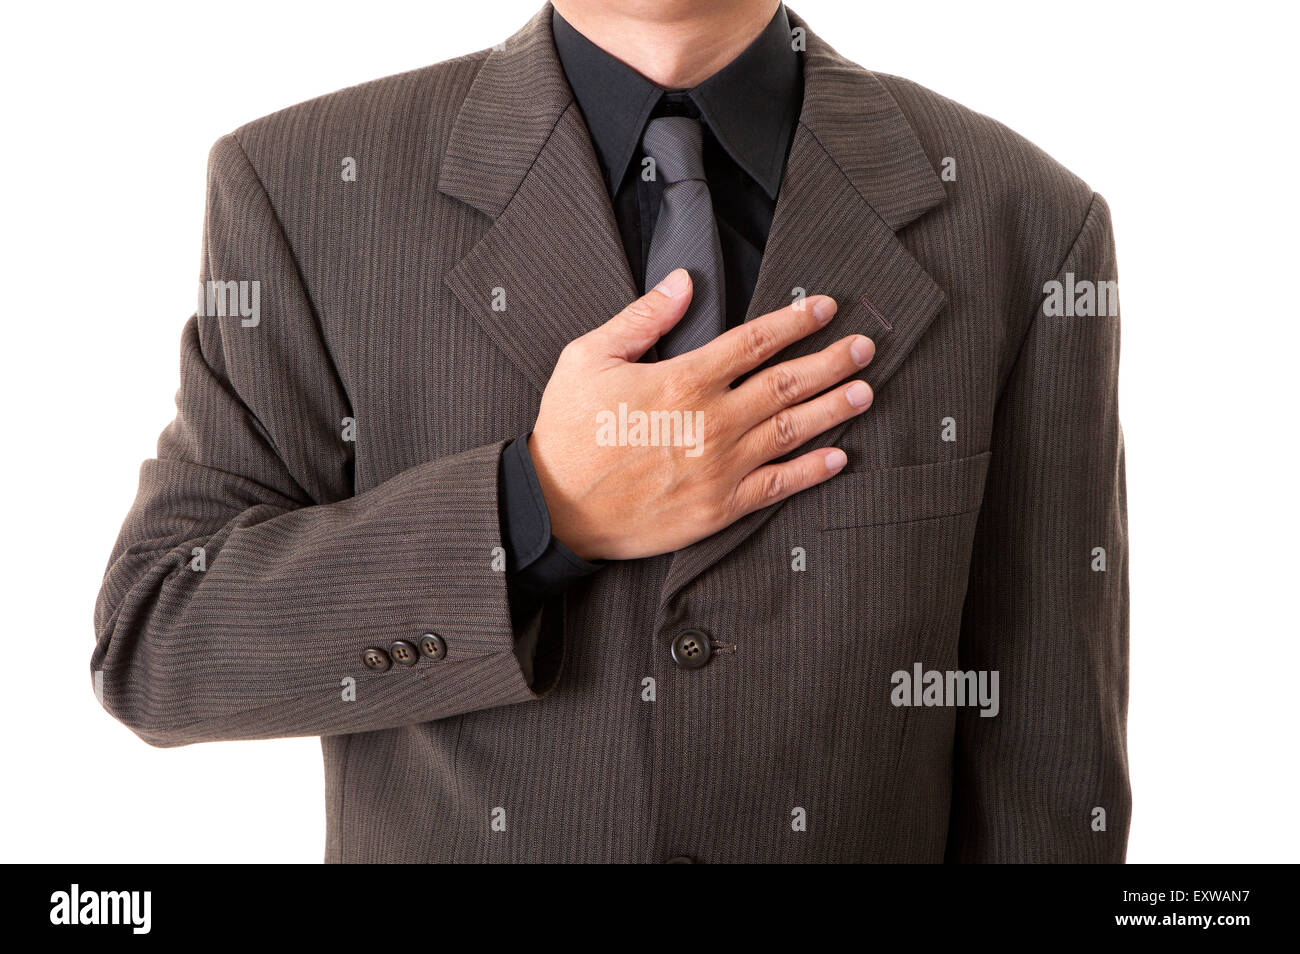 Man making oath with hand on chest, Stock Photo